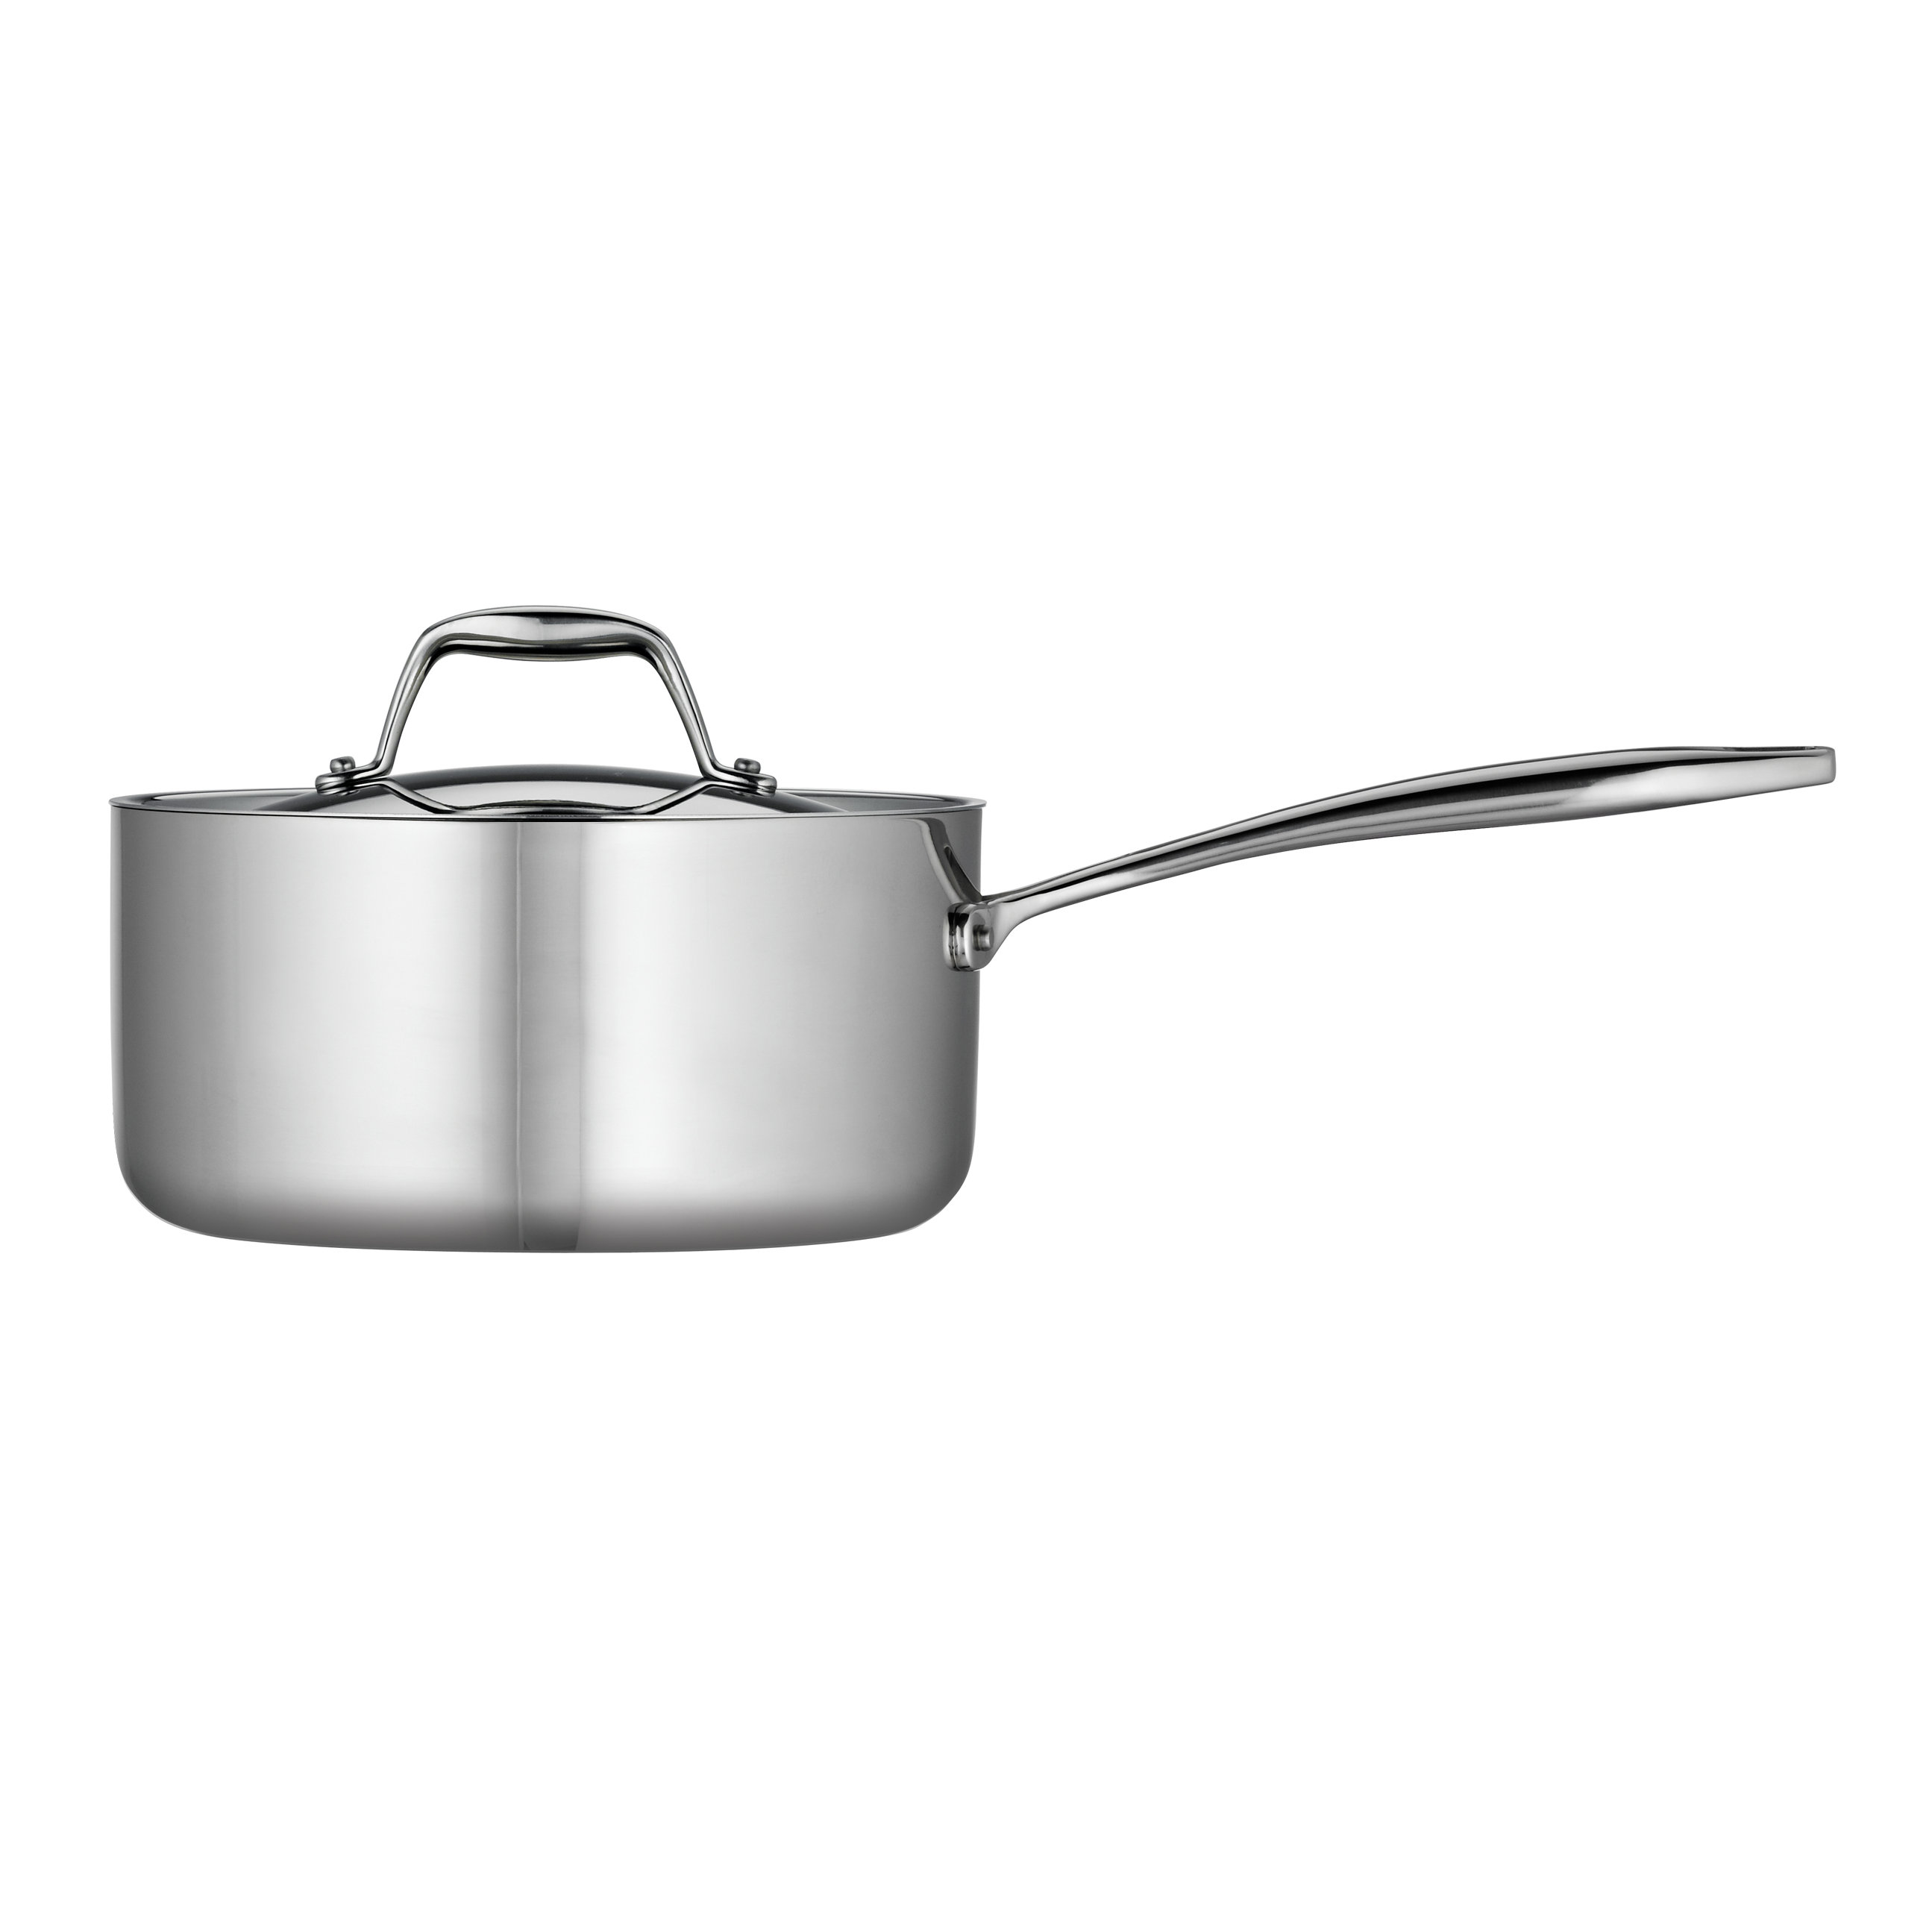 Tramontina 65180026 Brava Set of 4 3 1 Saucepan with Lid Suitable for All Hobs Stainless Steel 18/10 